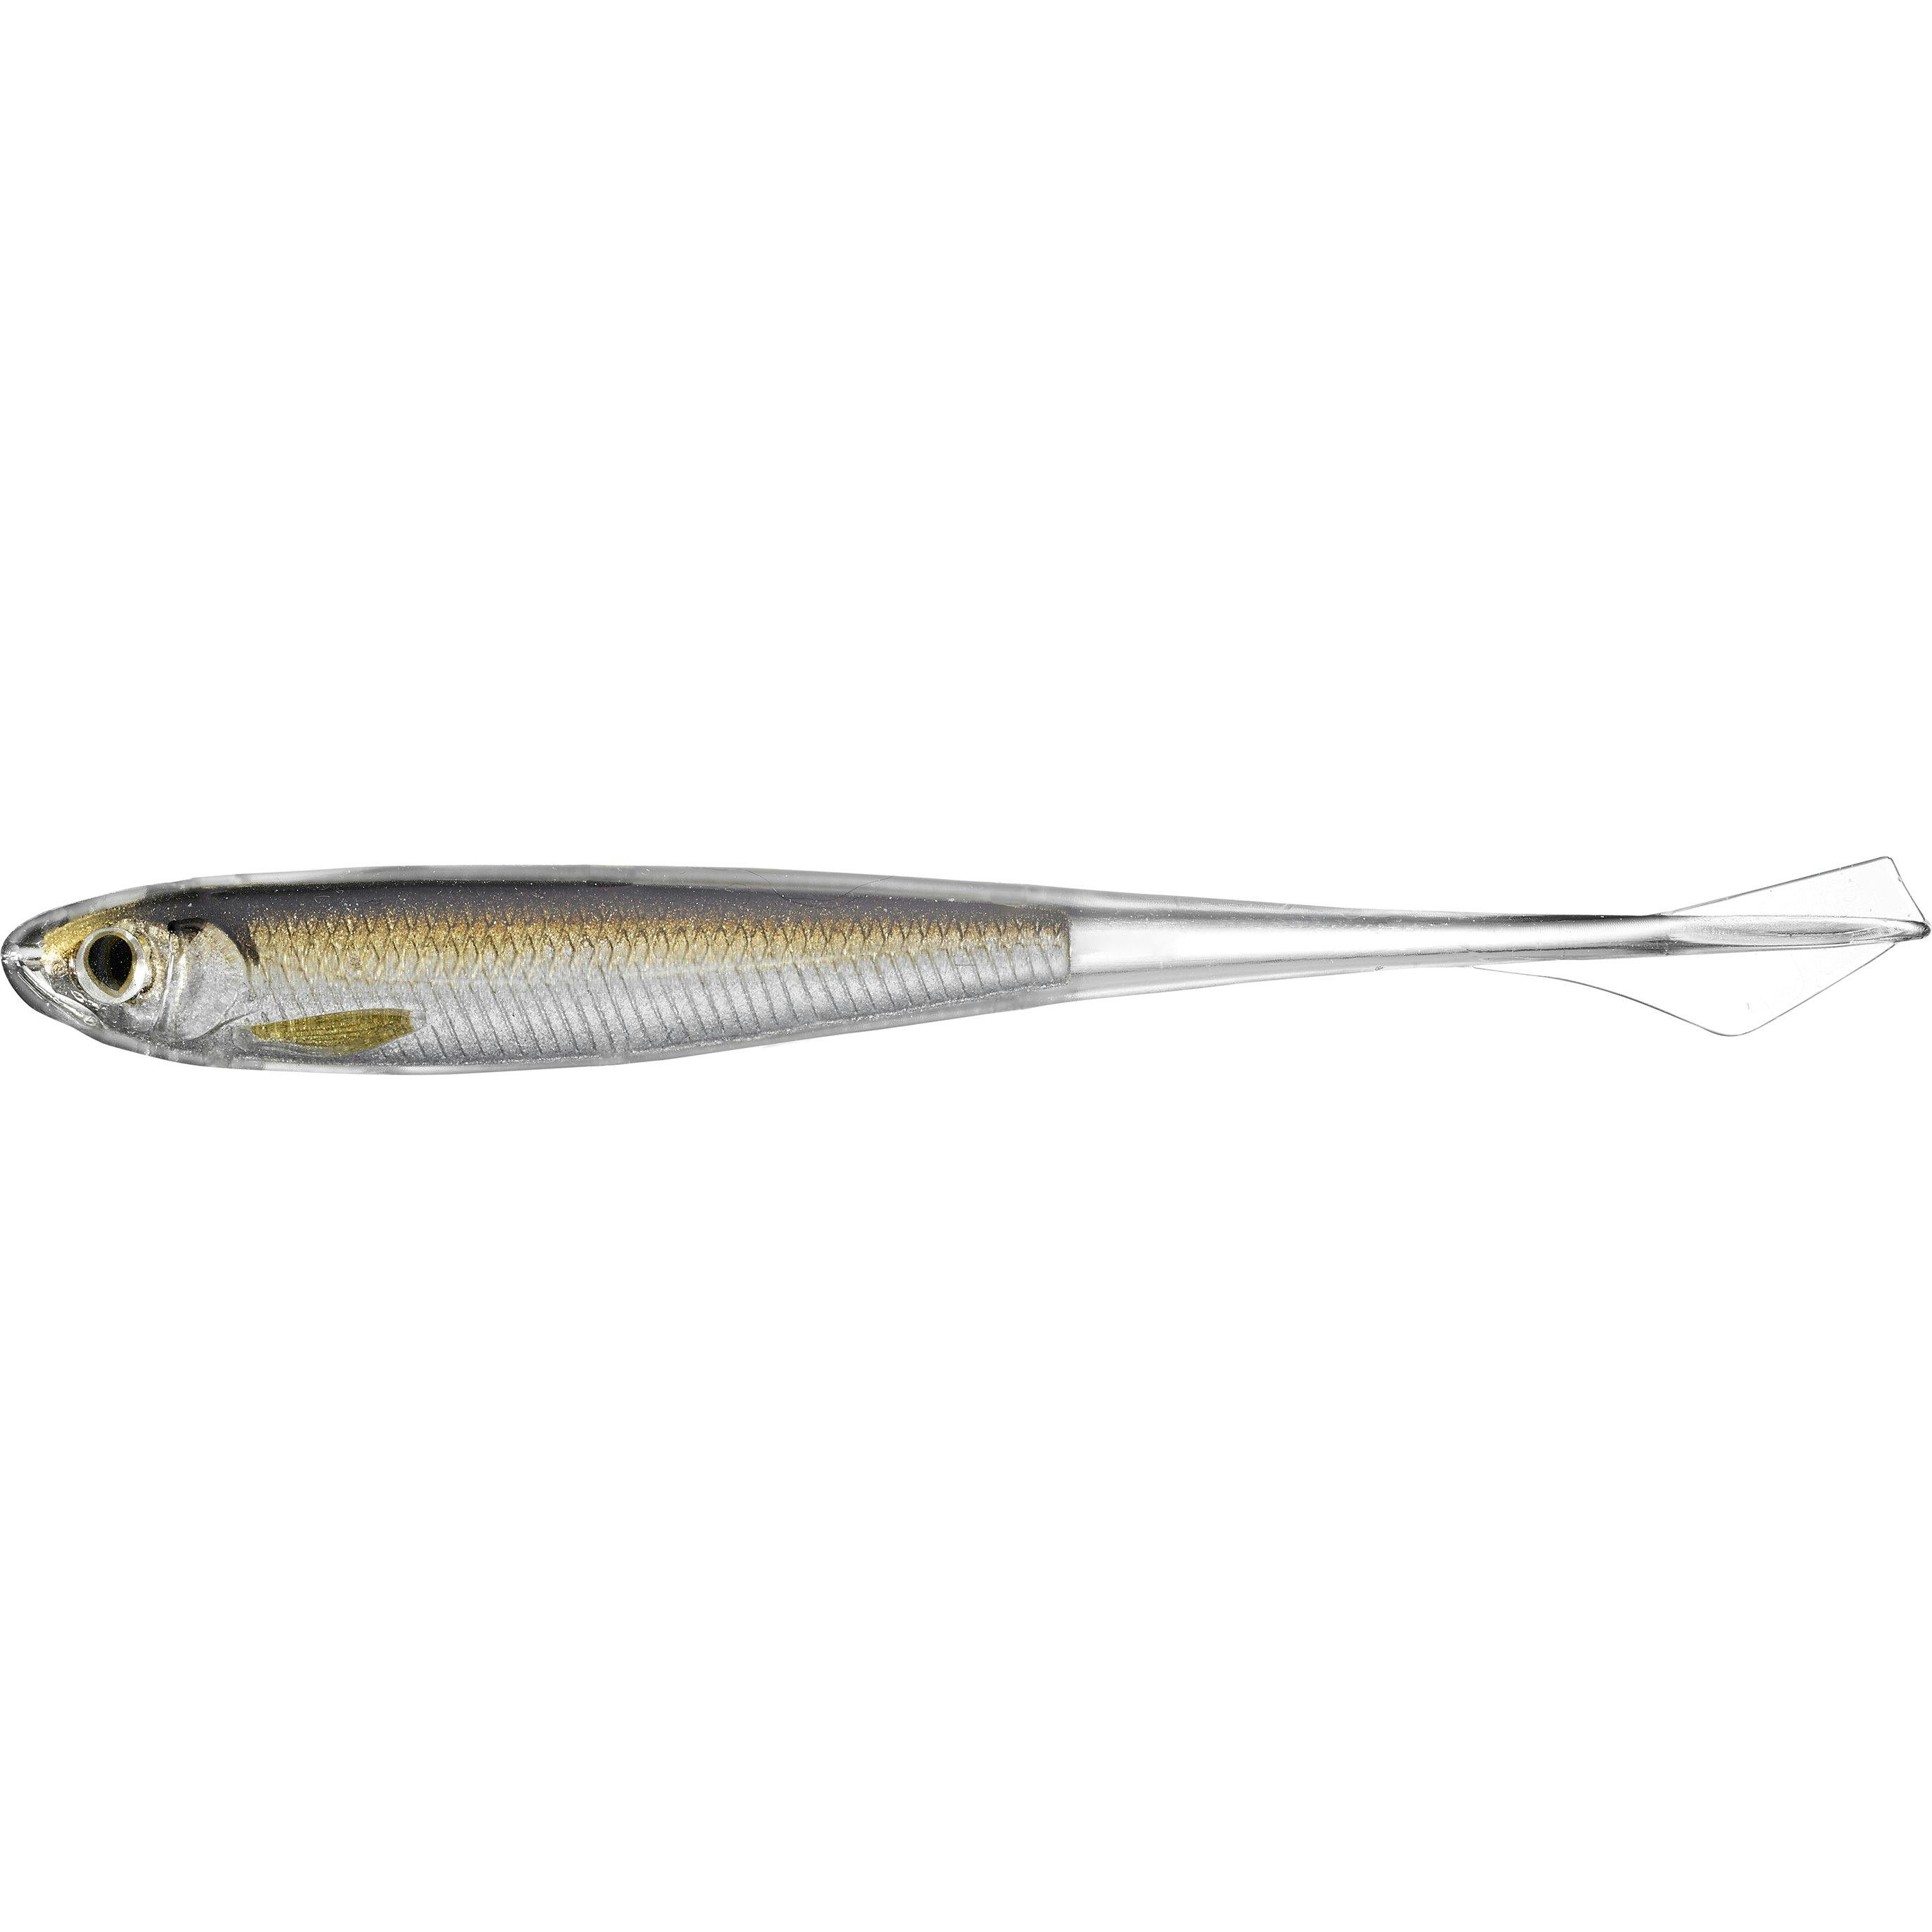 Live Target Ghost Tail Minnow - 3 3/4" / Silver/Brown